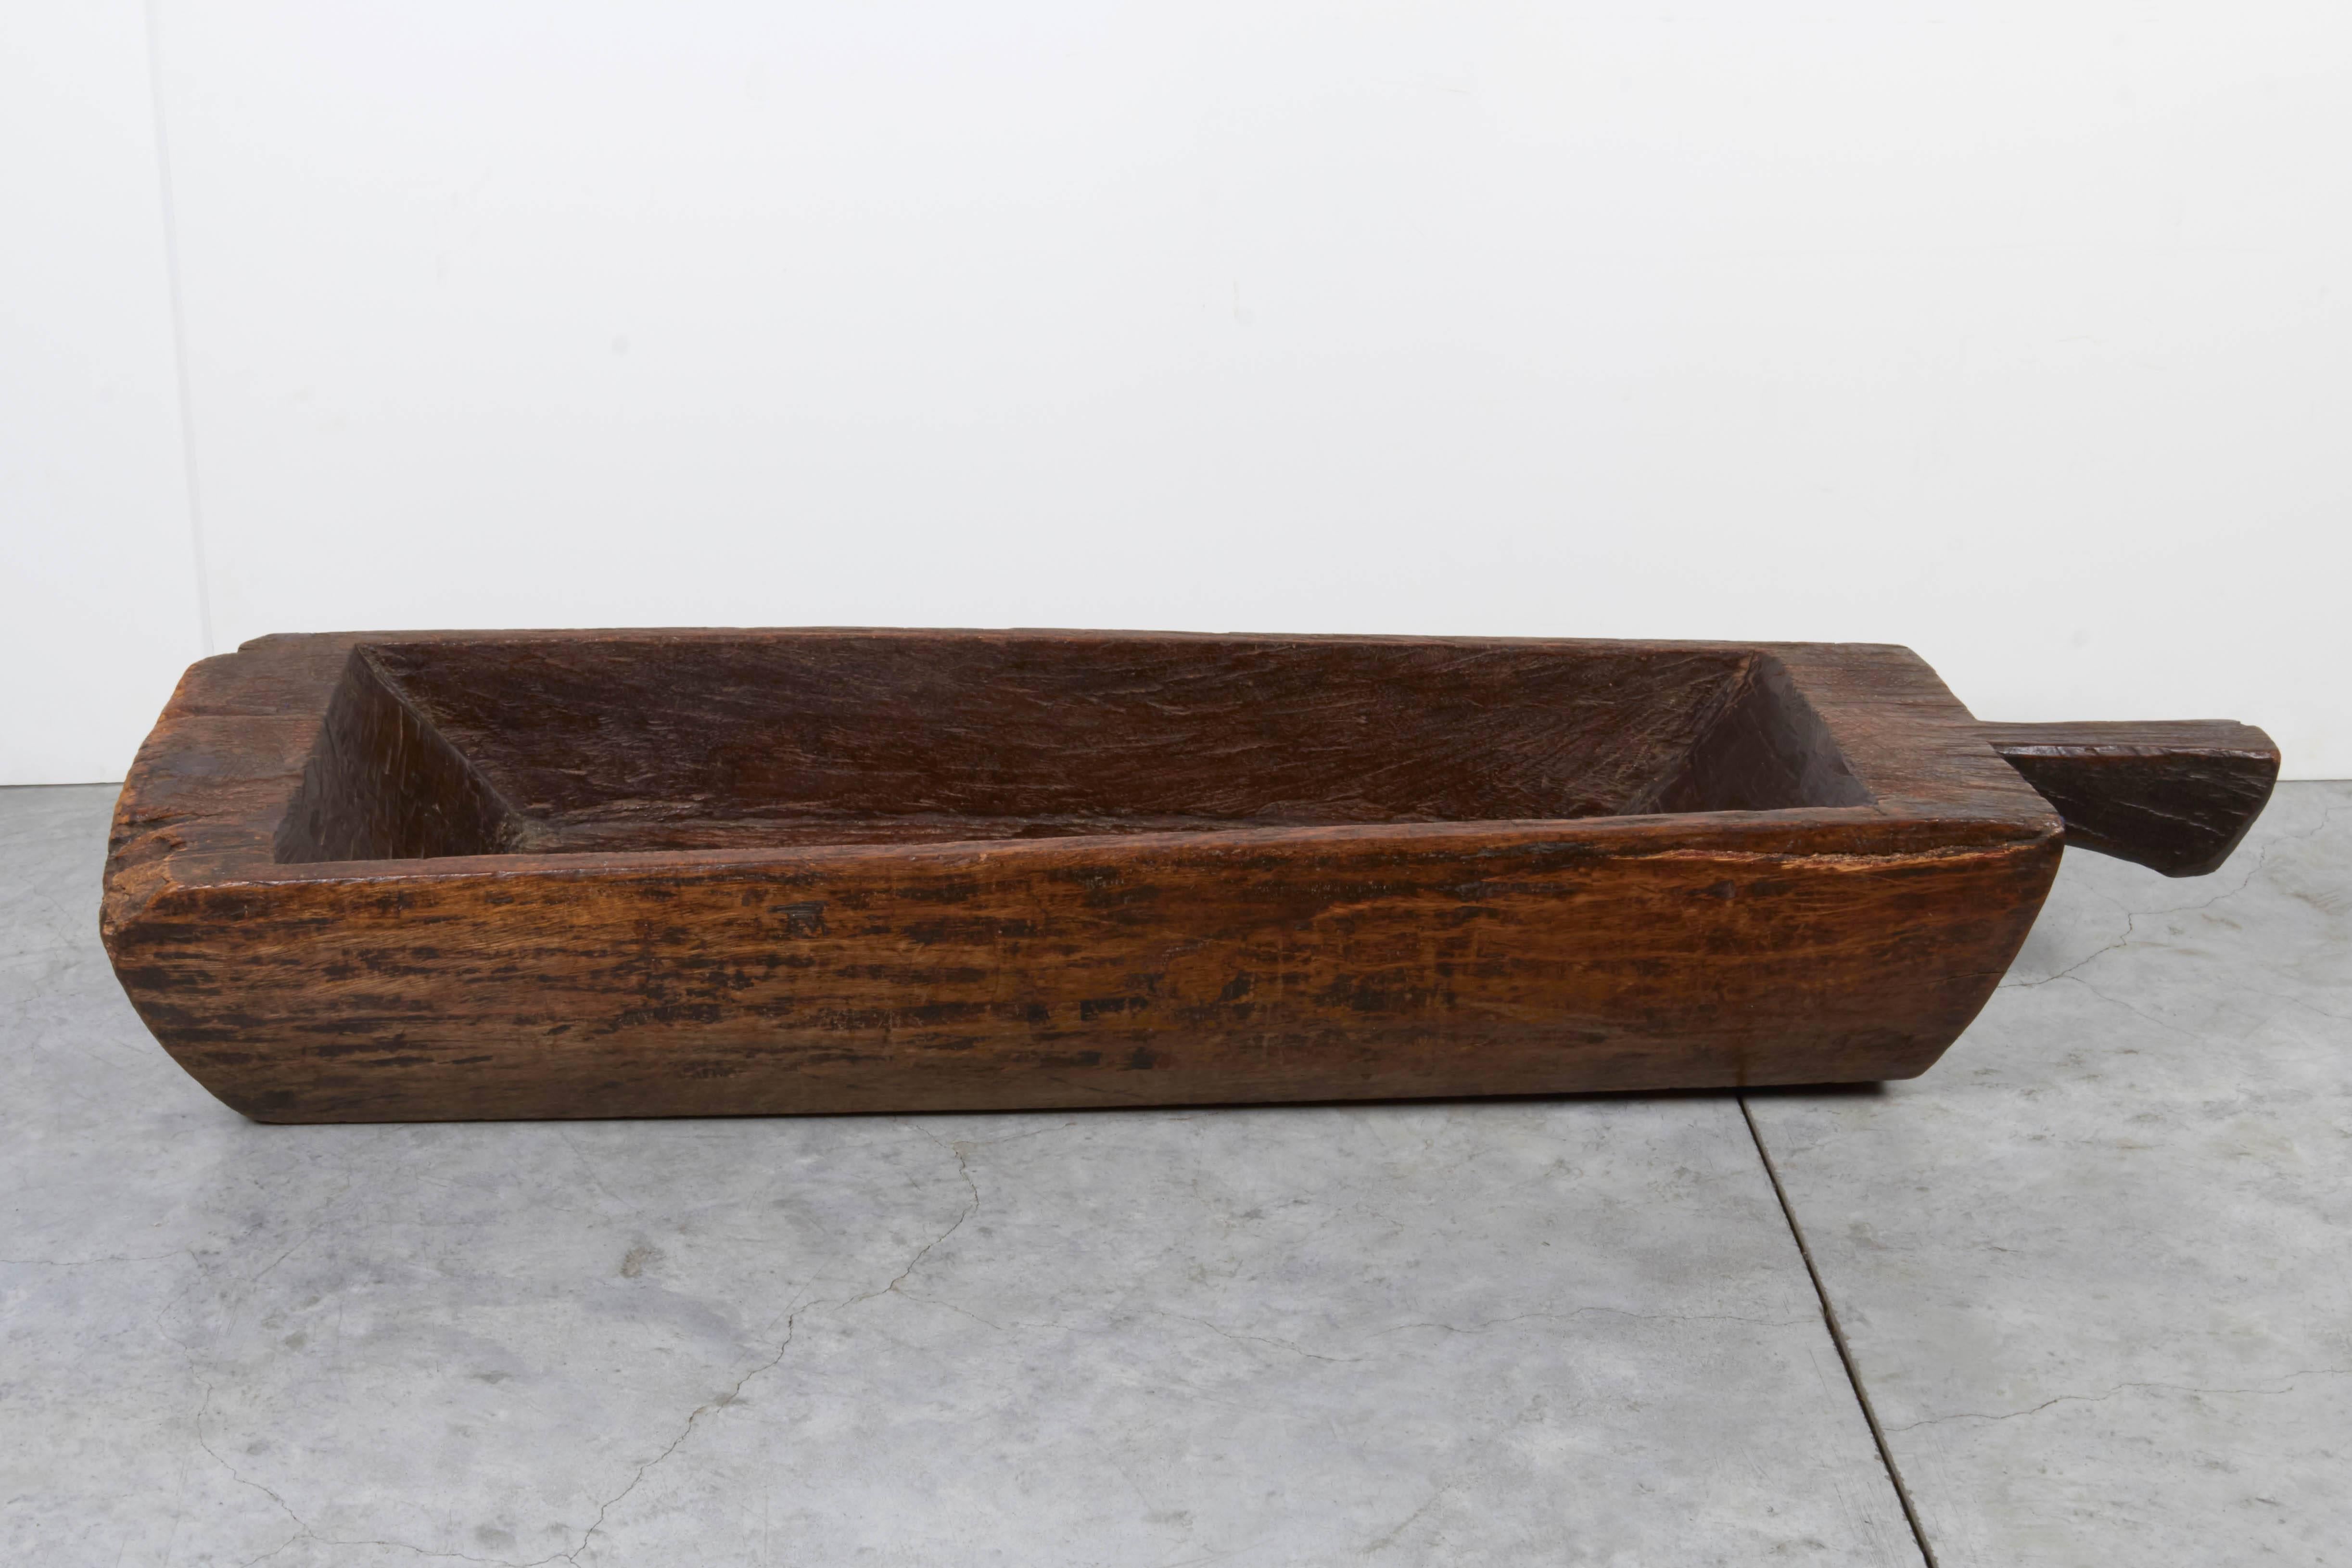 Large, Primitive, Thick Walled Antique Wooden Tray 3